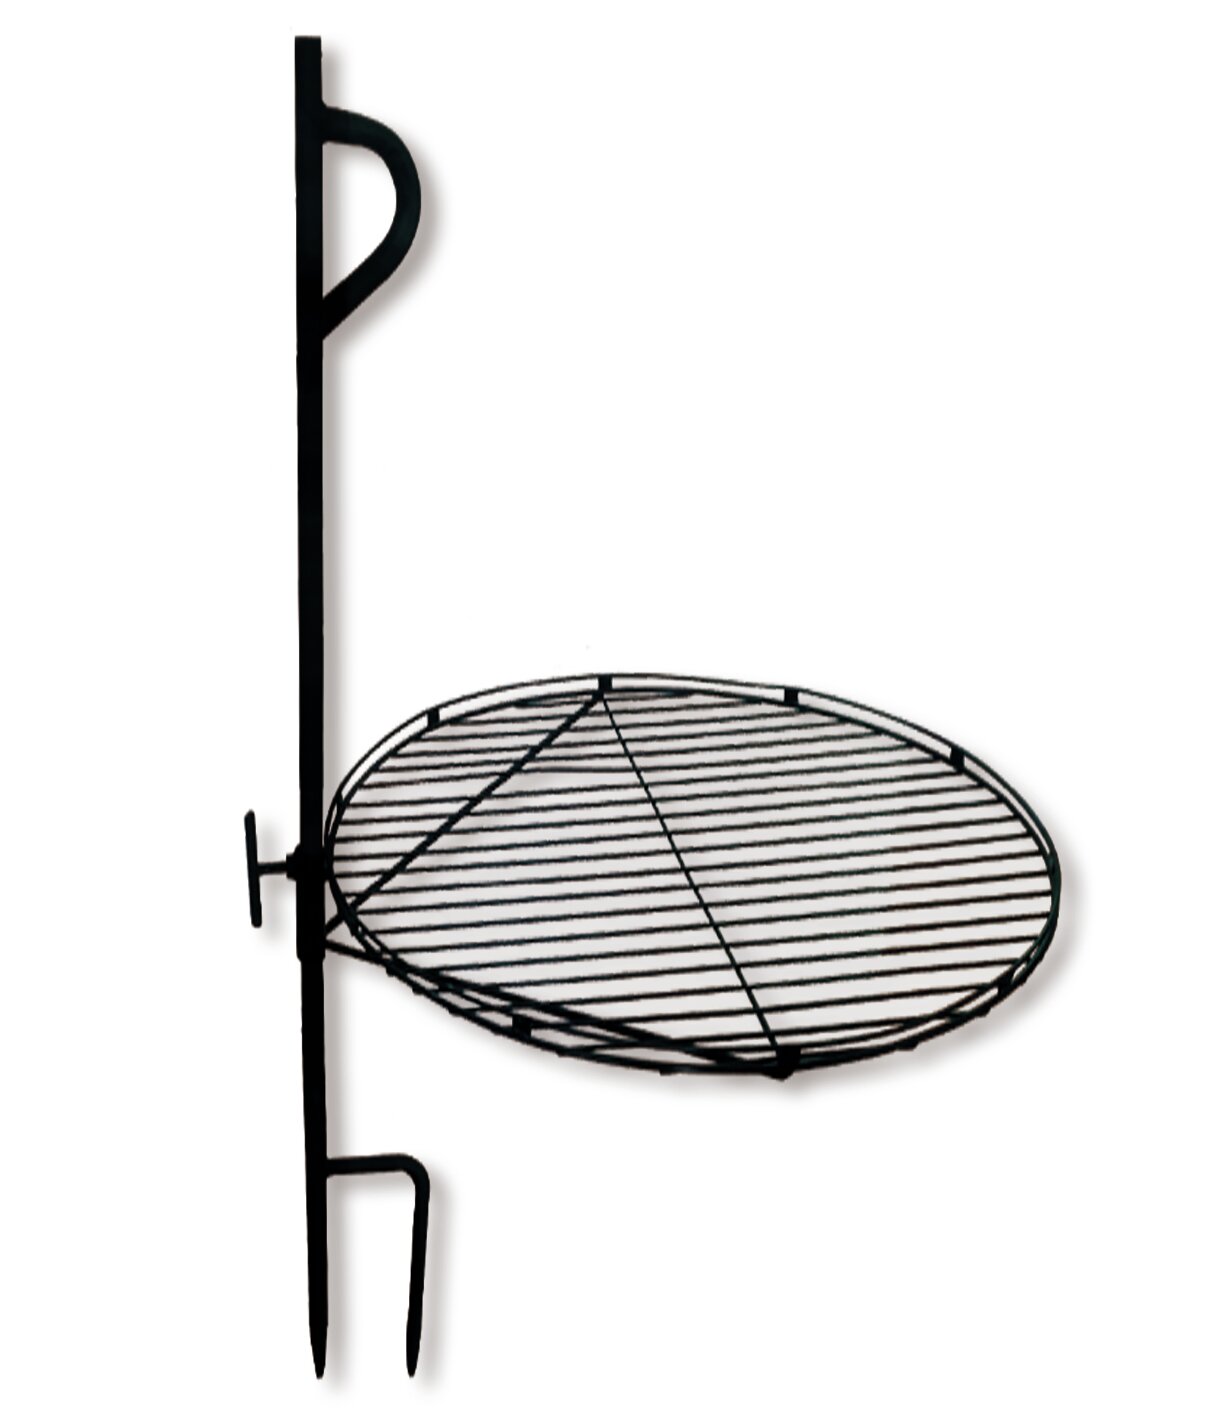 Backyard Expressions Campfire Cooking Grate Stake Fire Pit Tool Reviews Wayfair